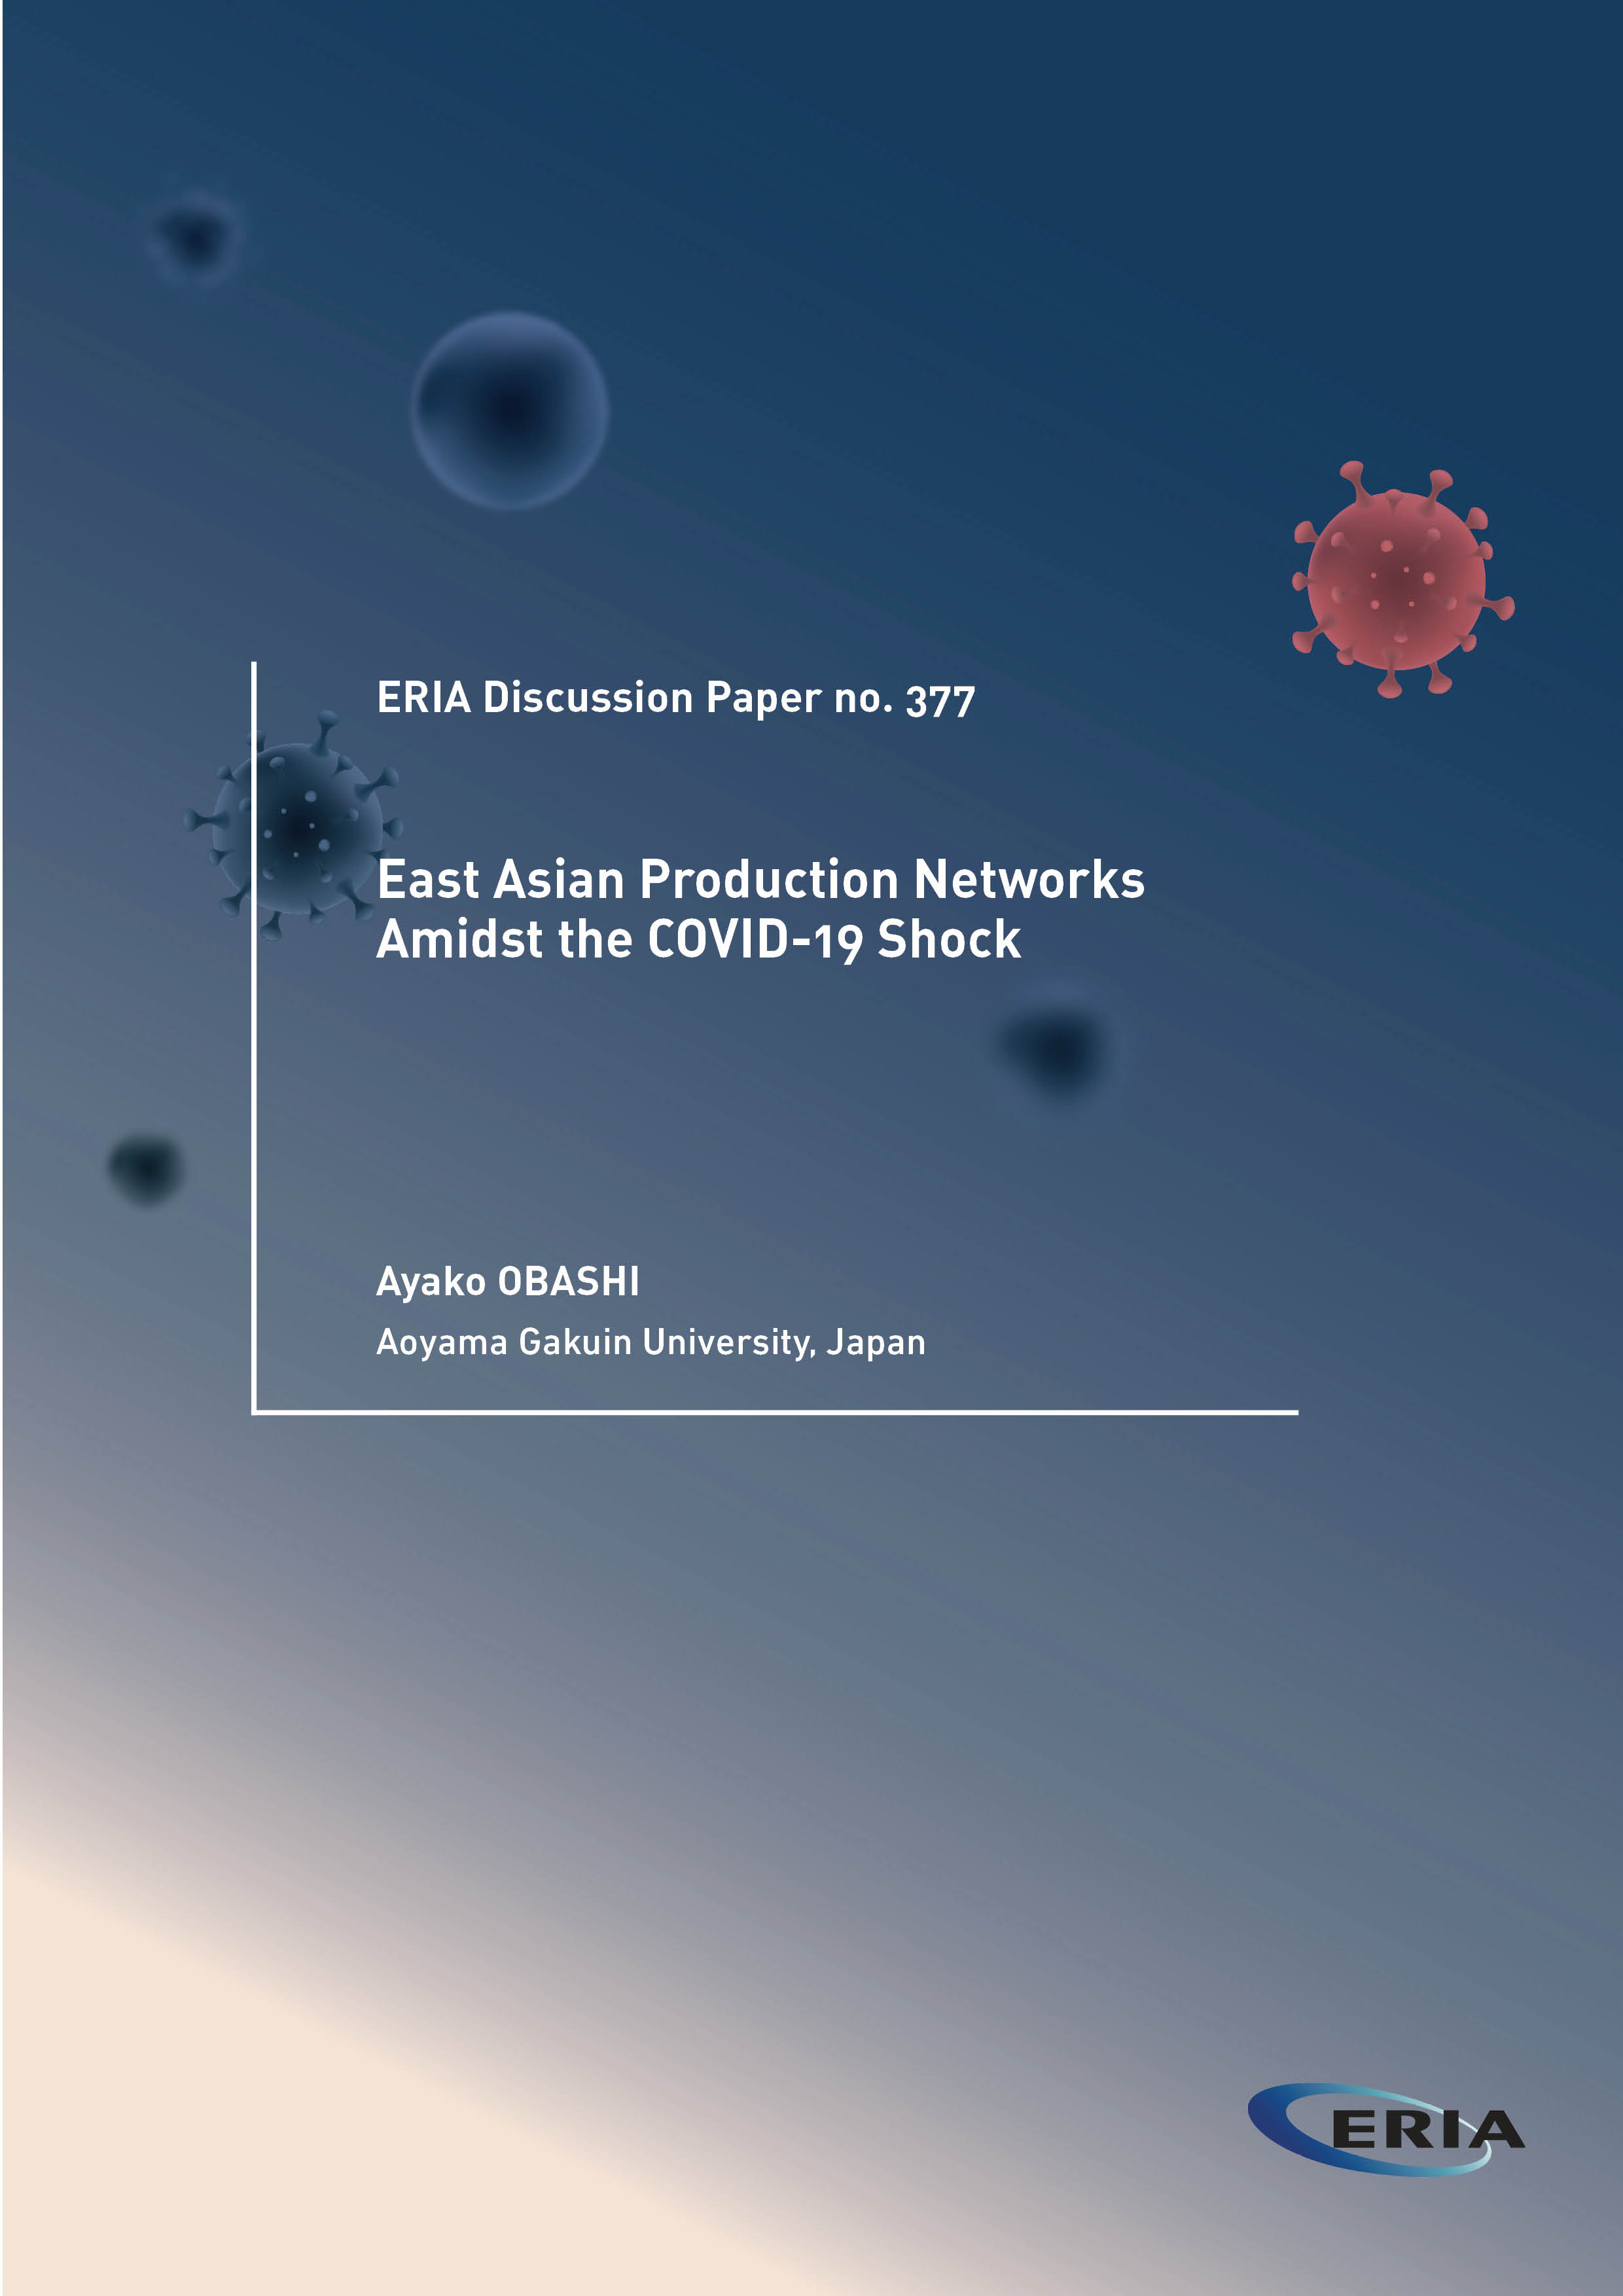 East Asian Production Networks Amidst the COVID-19 Shock